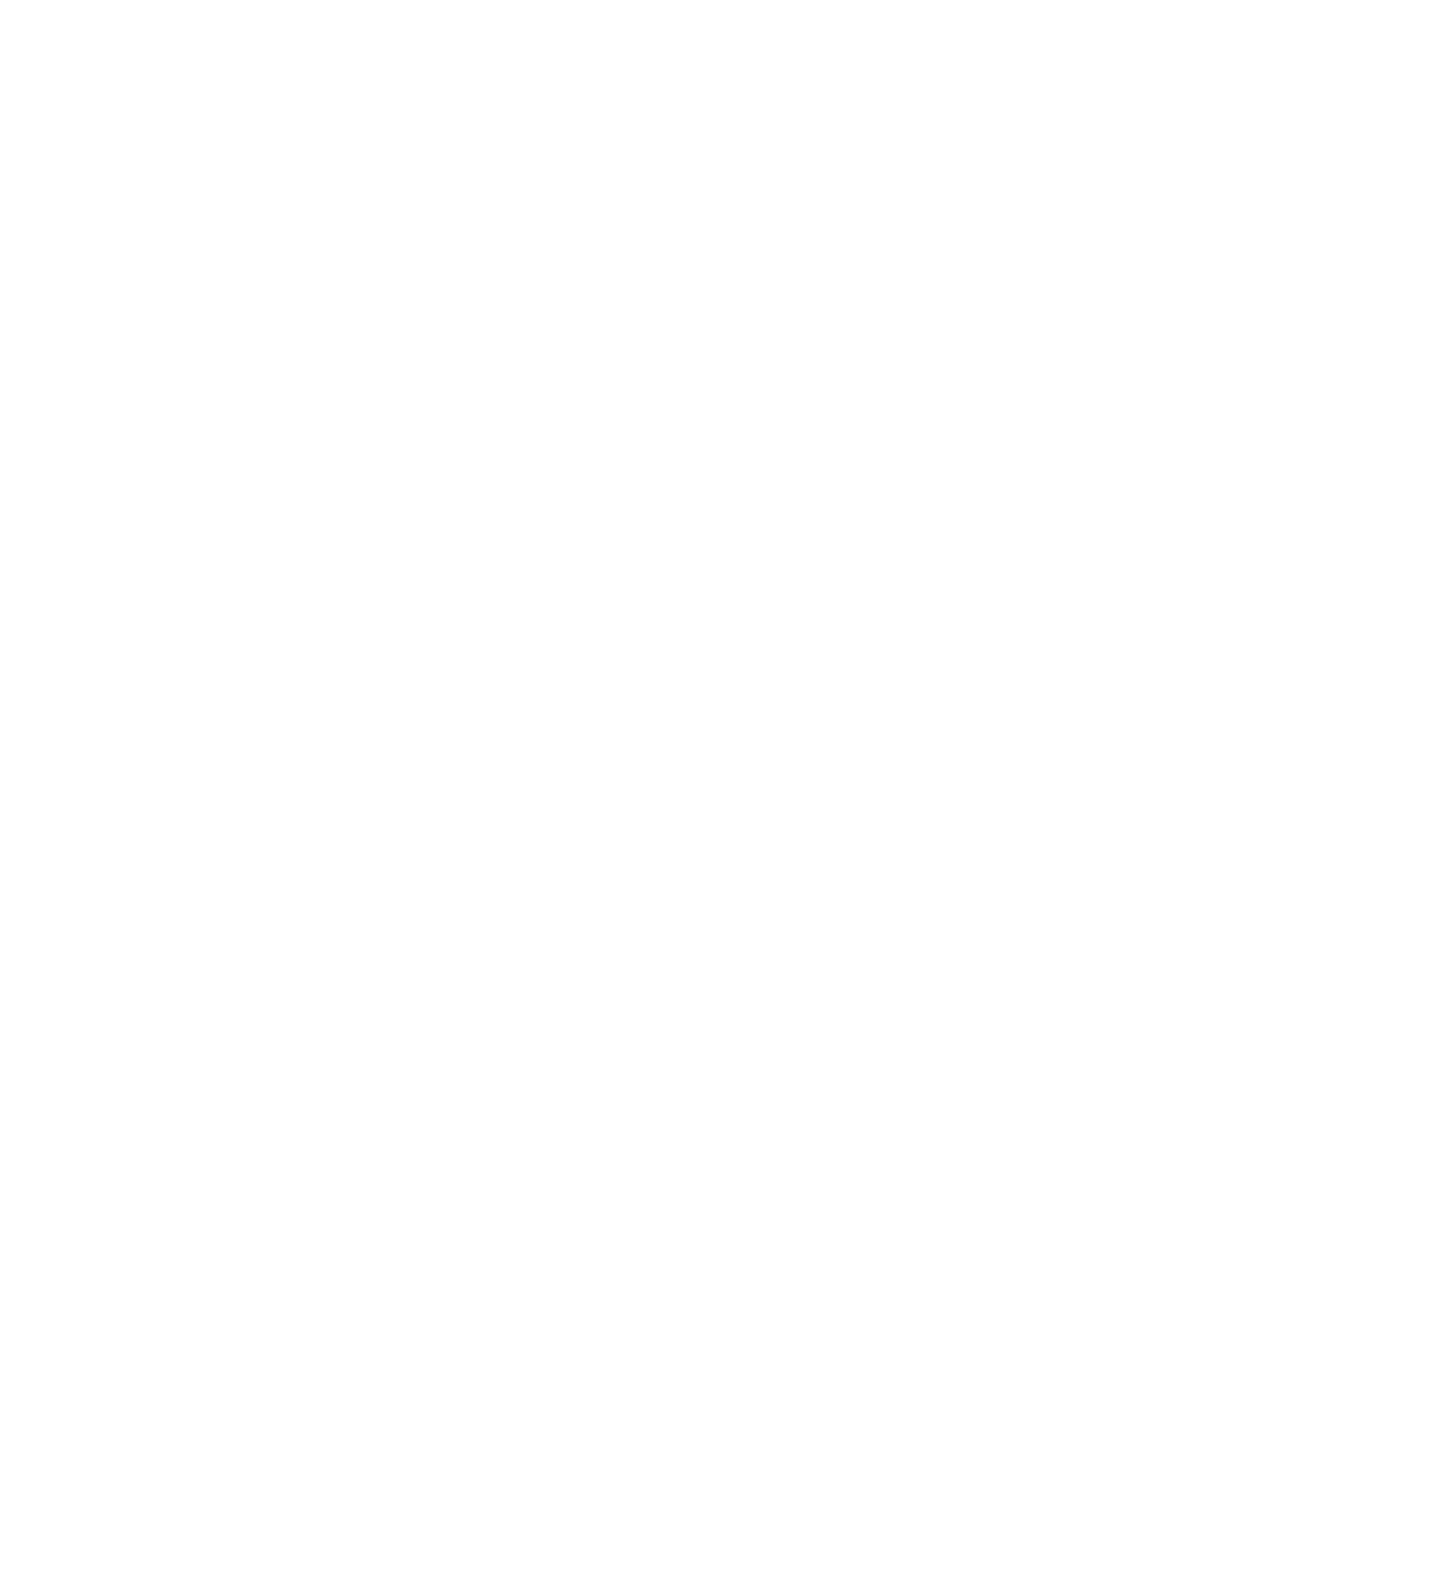 MB Production Globally Living